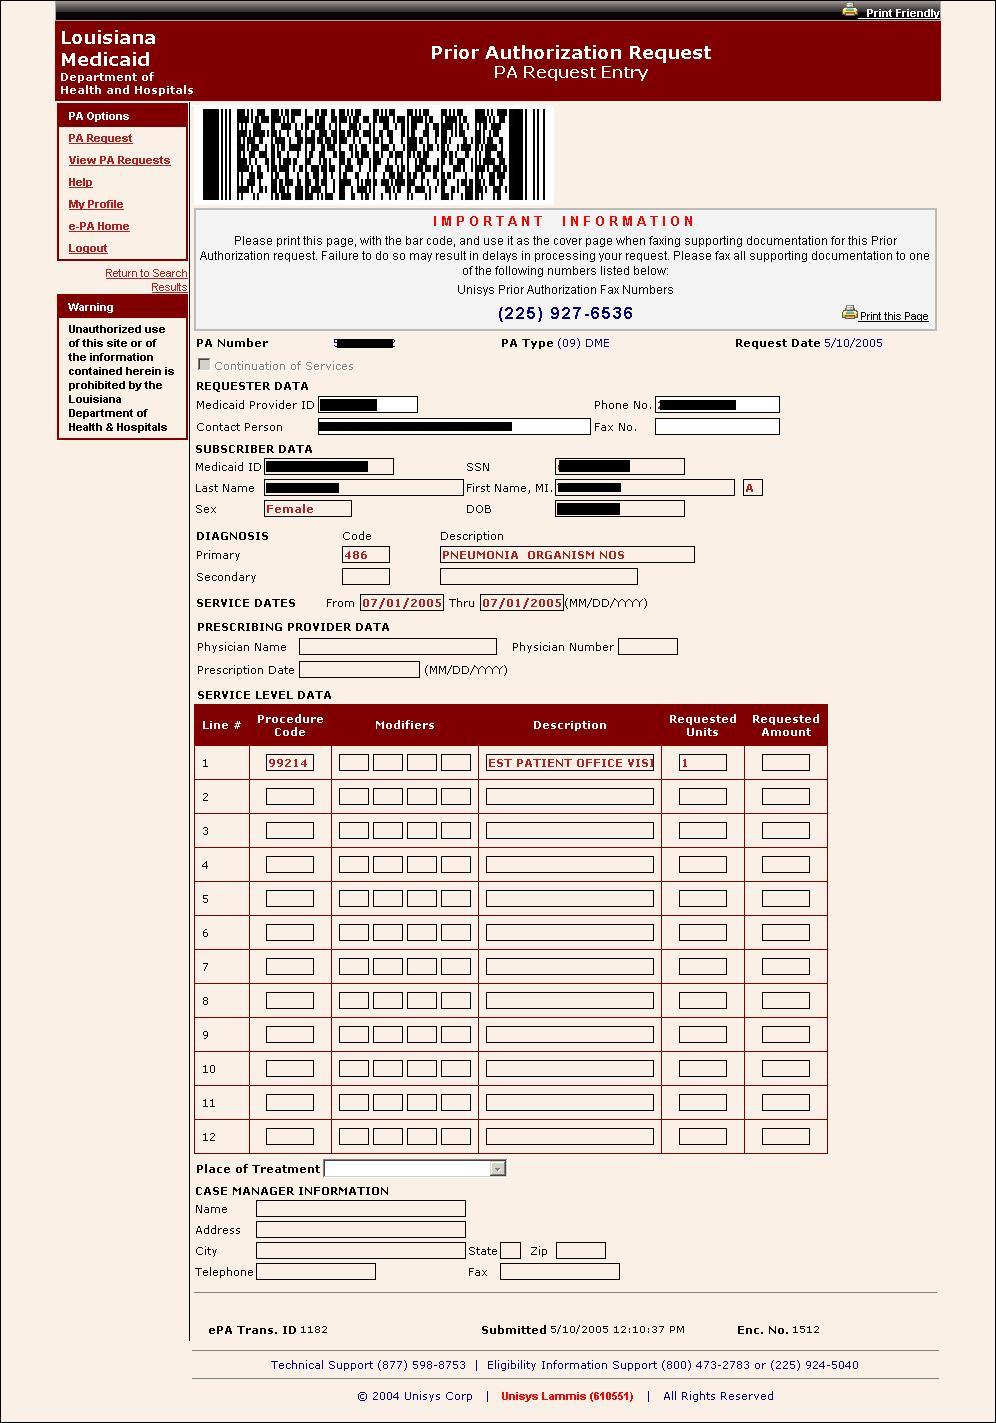 The PA Request Entry page will be displayed with the addition of a header at the top that includes a bar code.